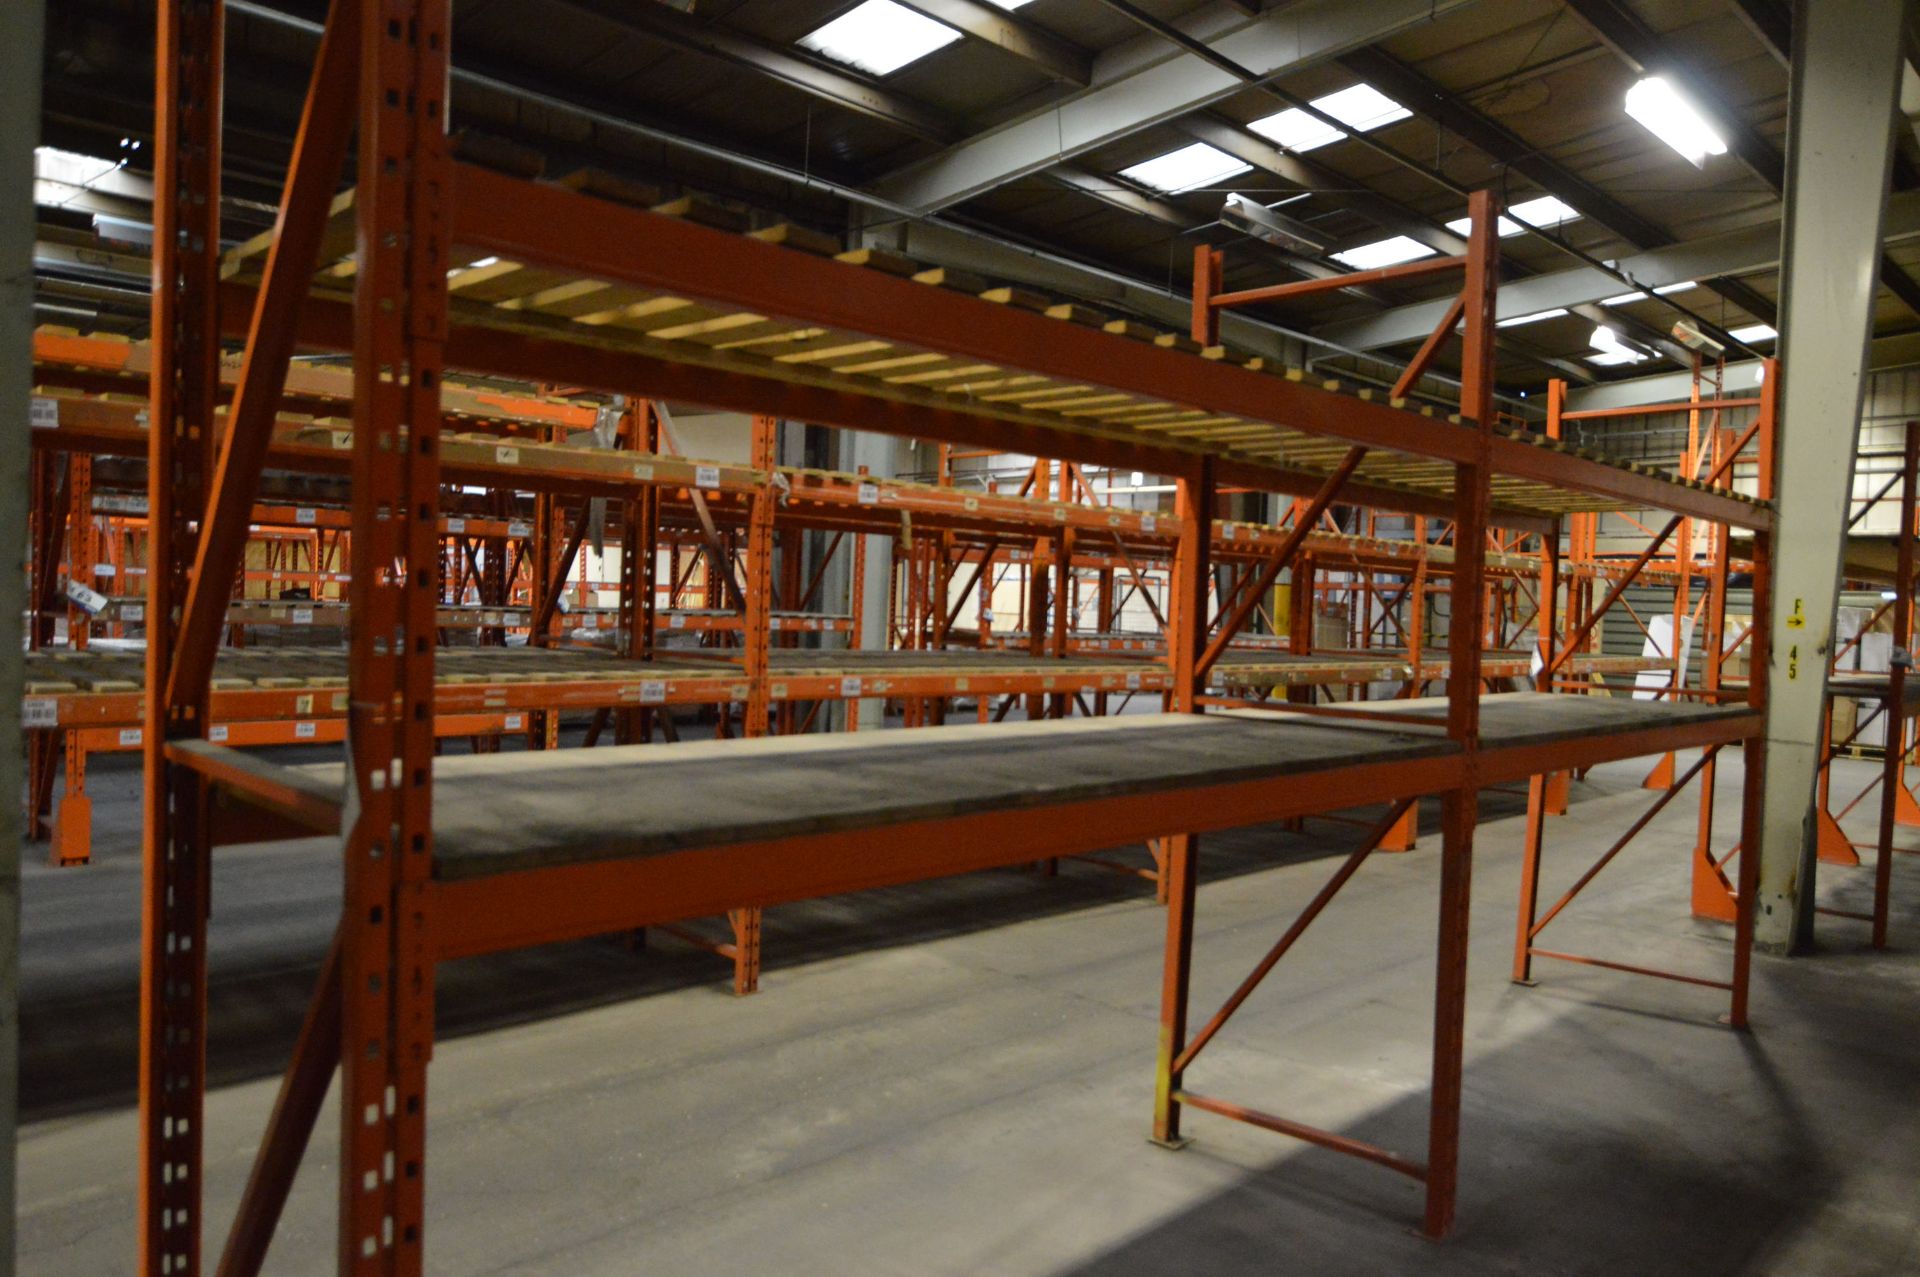 Redirack SD1.70 Single Sided Two Bay Two Tier Pallet Rack, approx. 5.5m long x 900mm x 2.7m high,